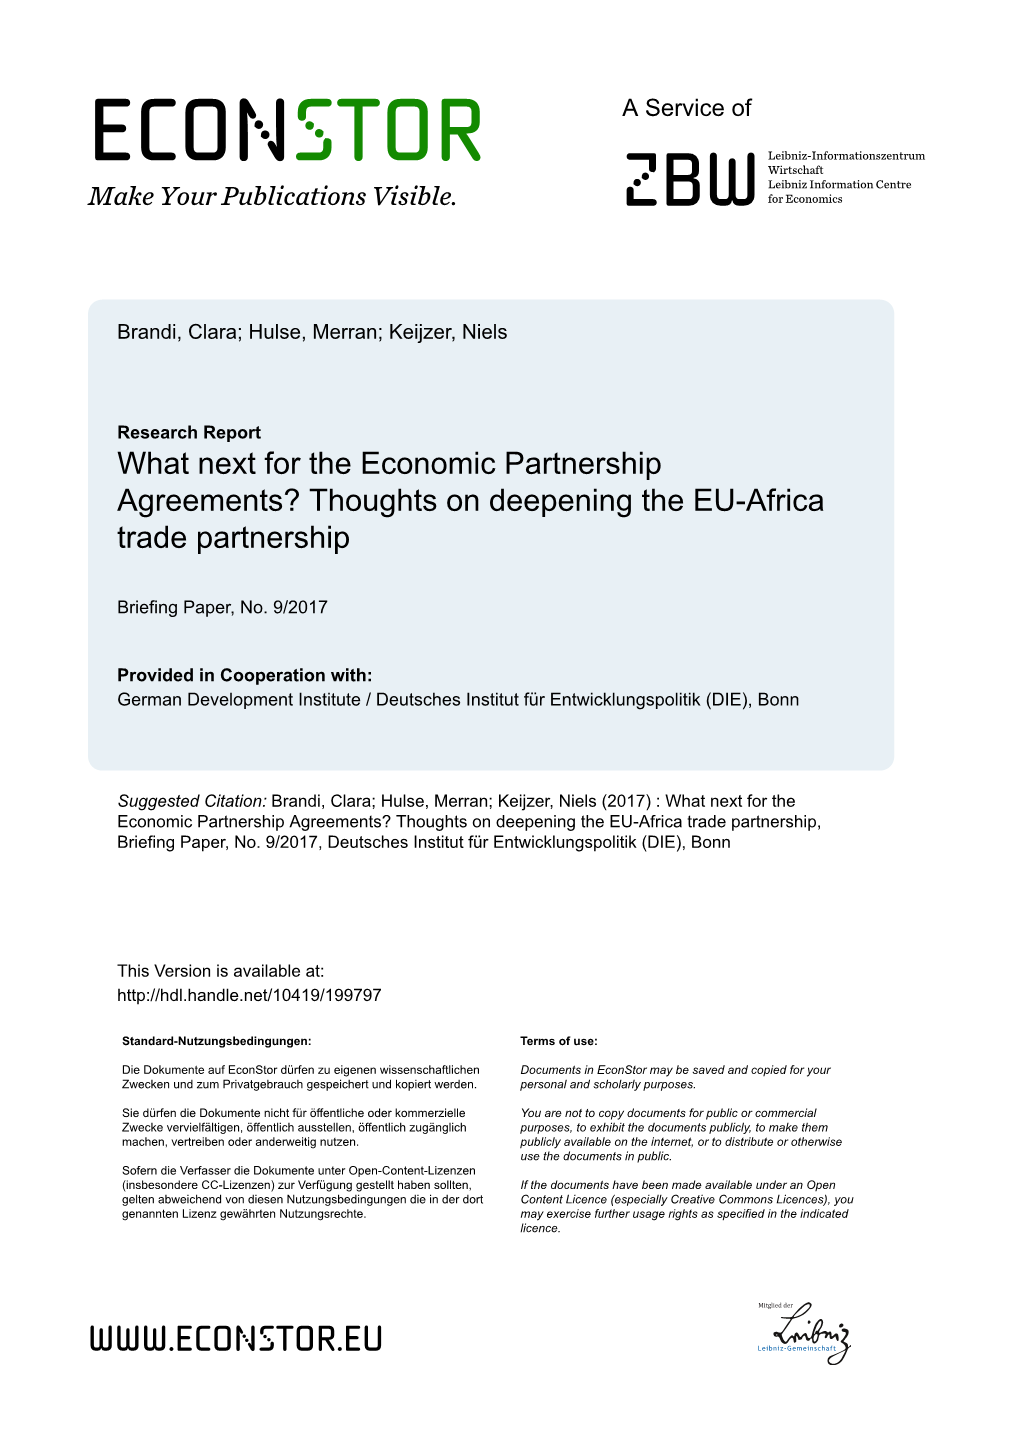 What Next for the Economic Partnership Agreements? Thoughts on Deepening the EU-Africa Trade Partnership